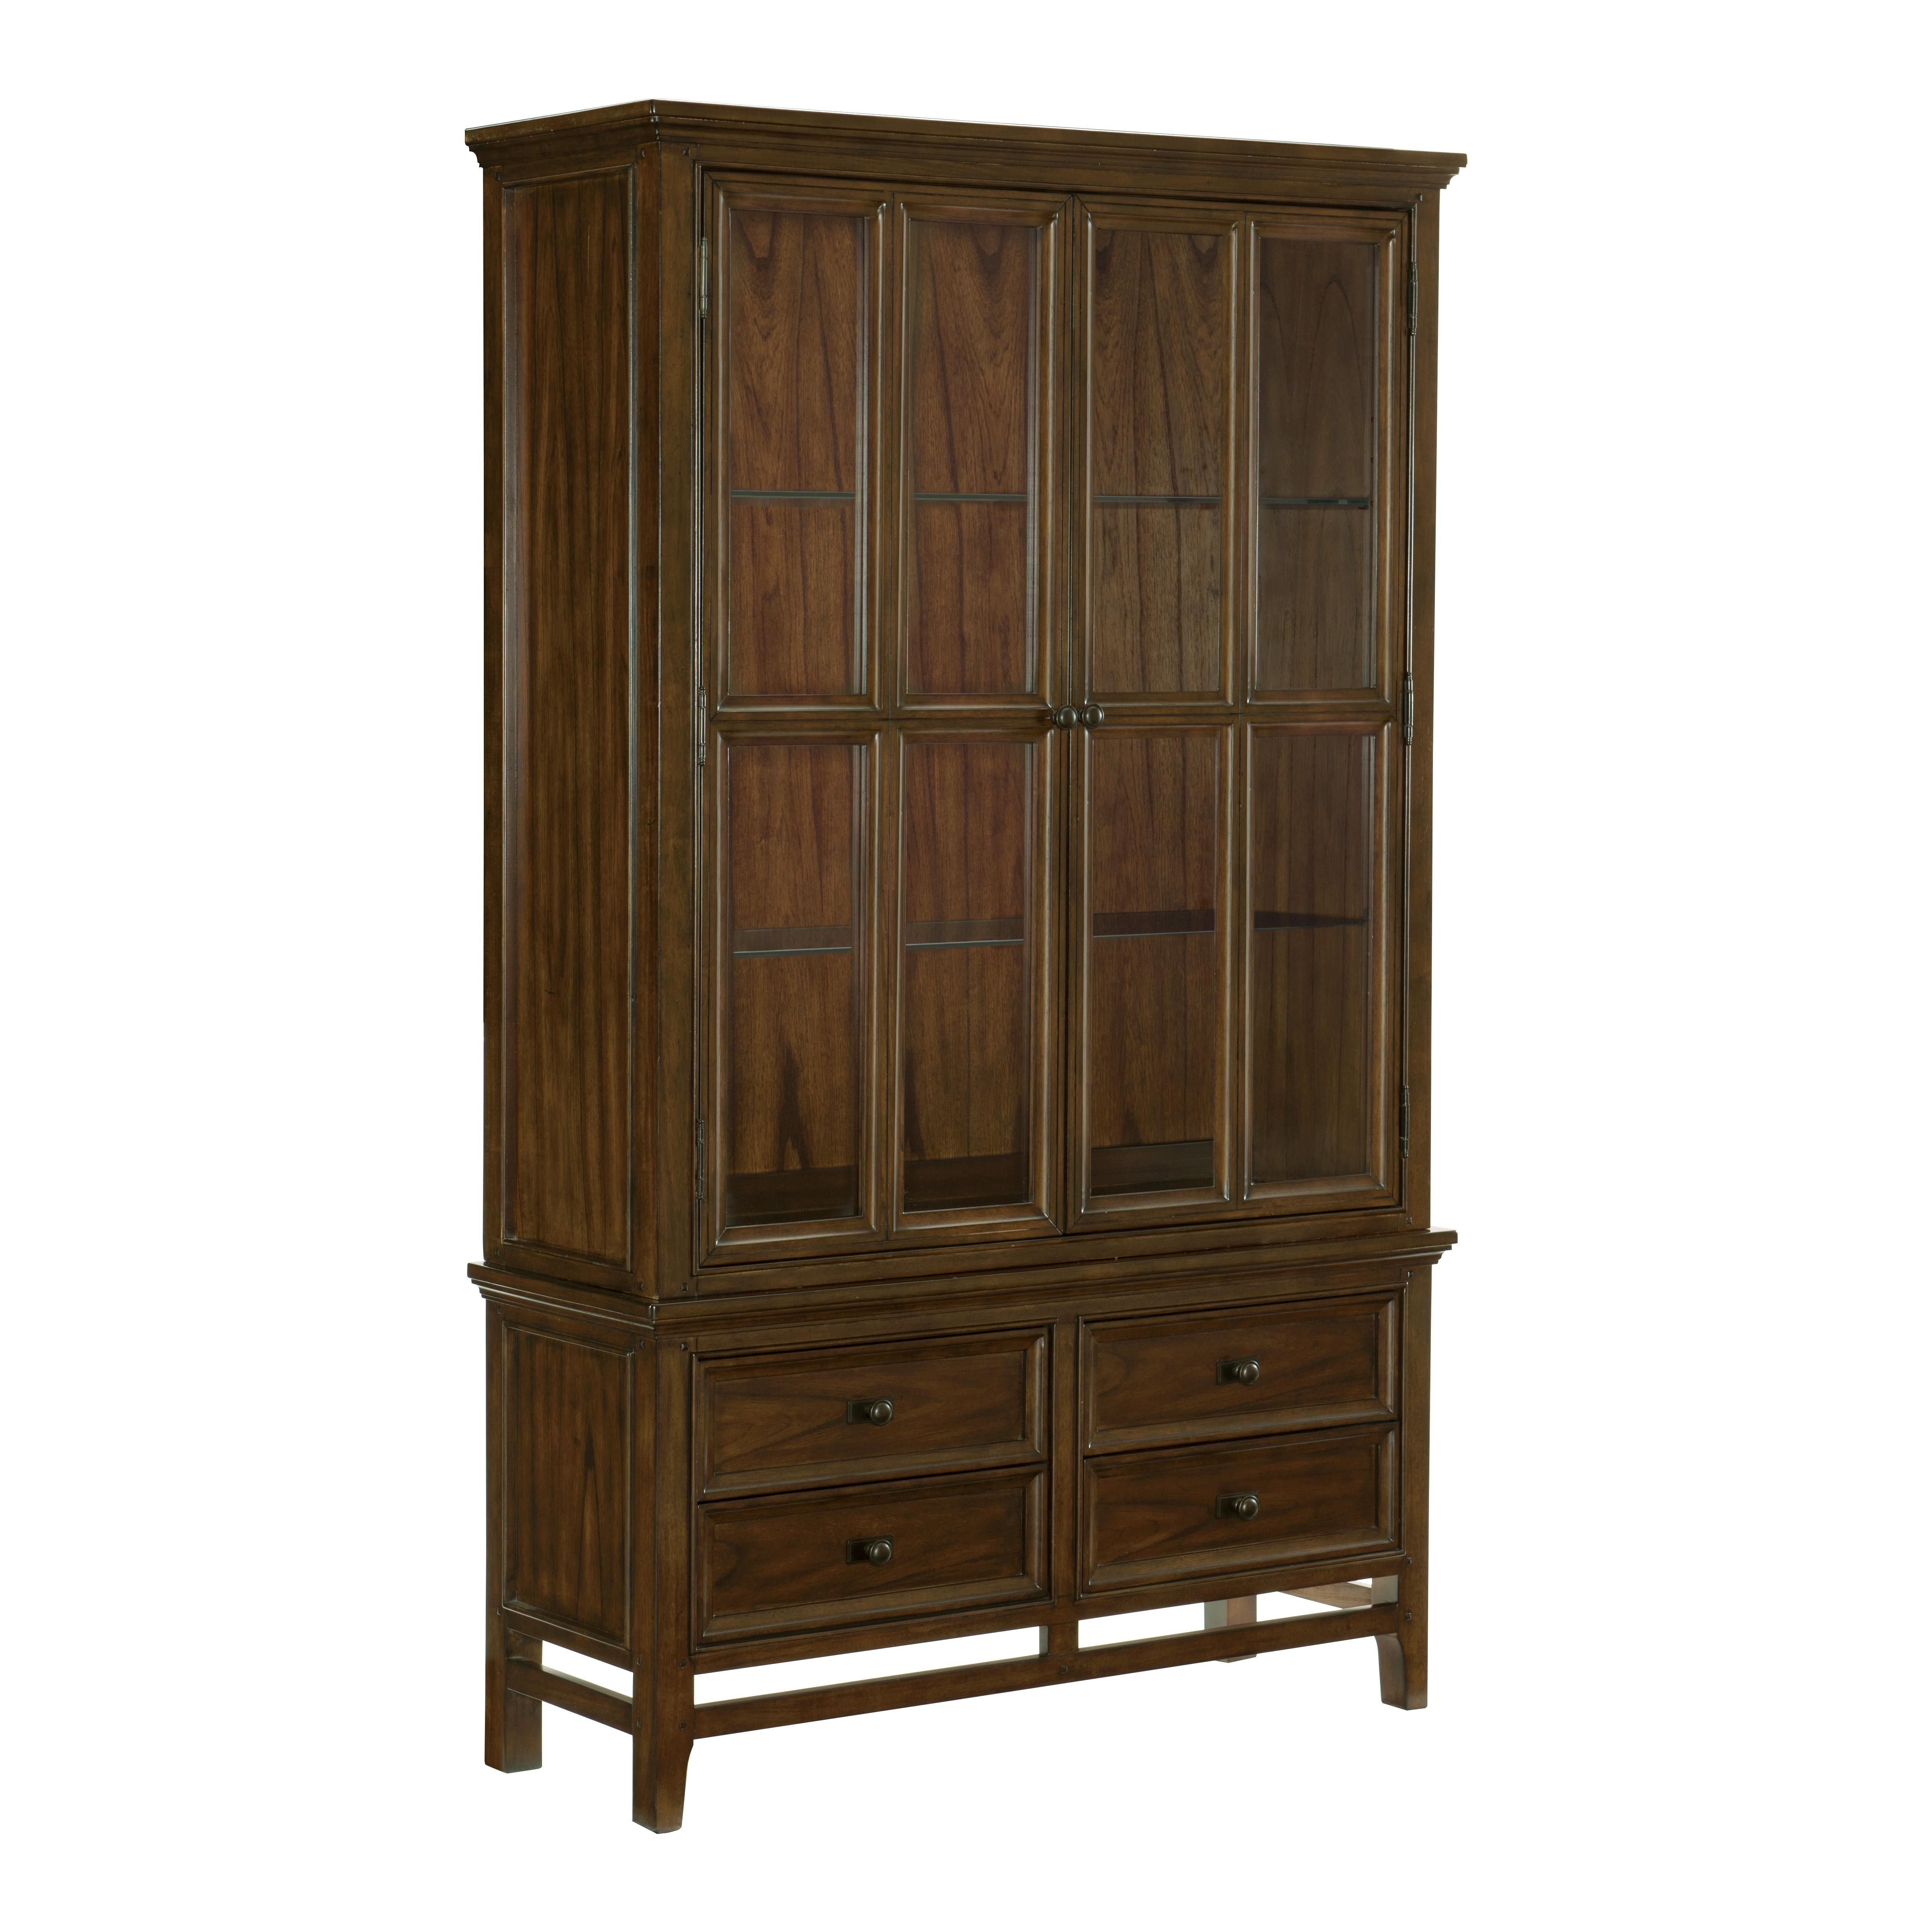 Traditional Hutch & Buffet 1649-50* Frazier Park 1649-50* in Cherry 